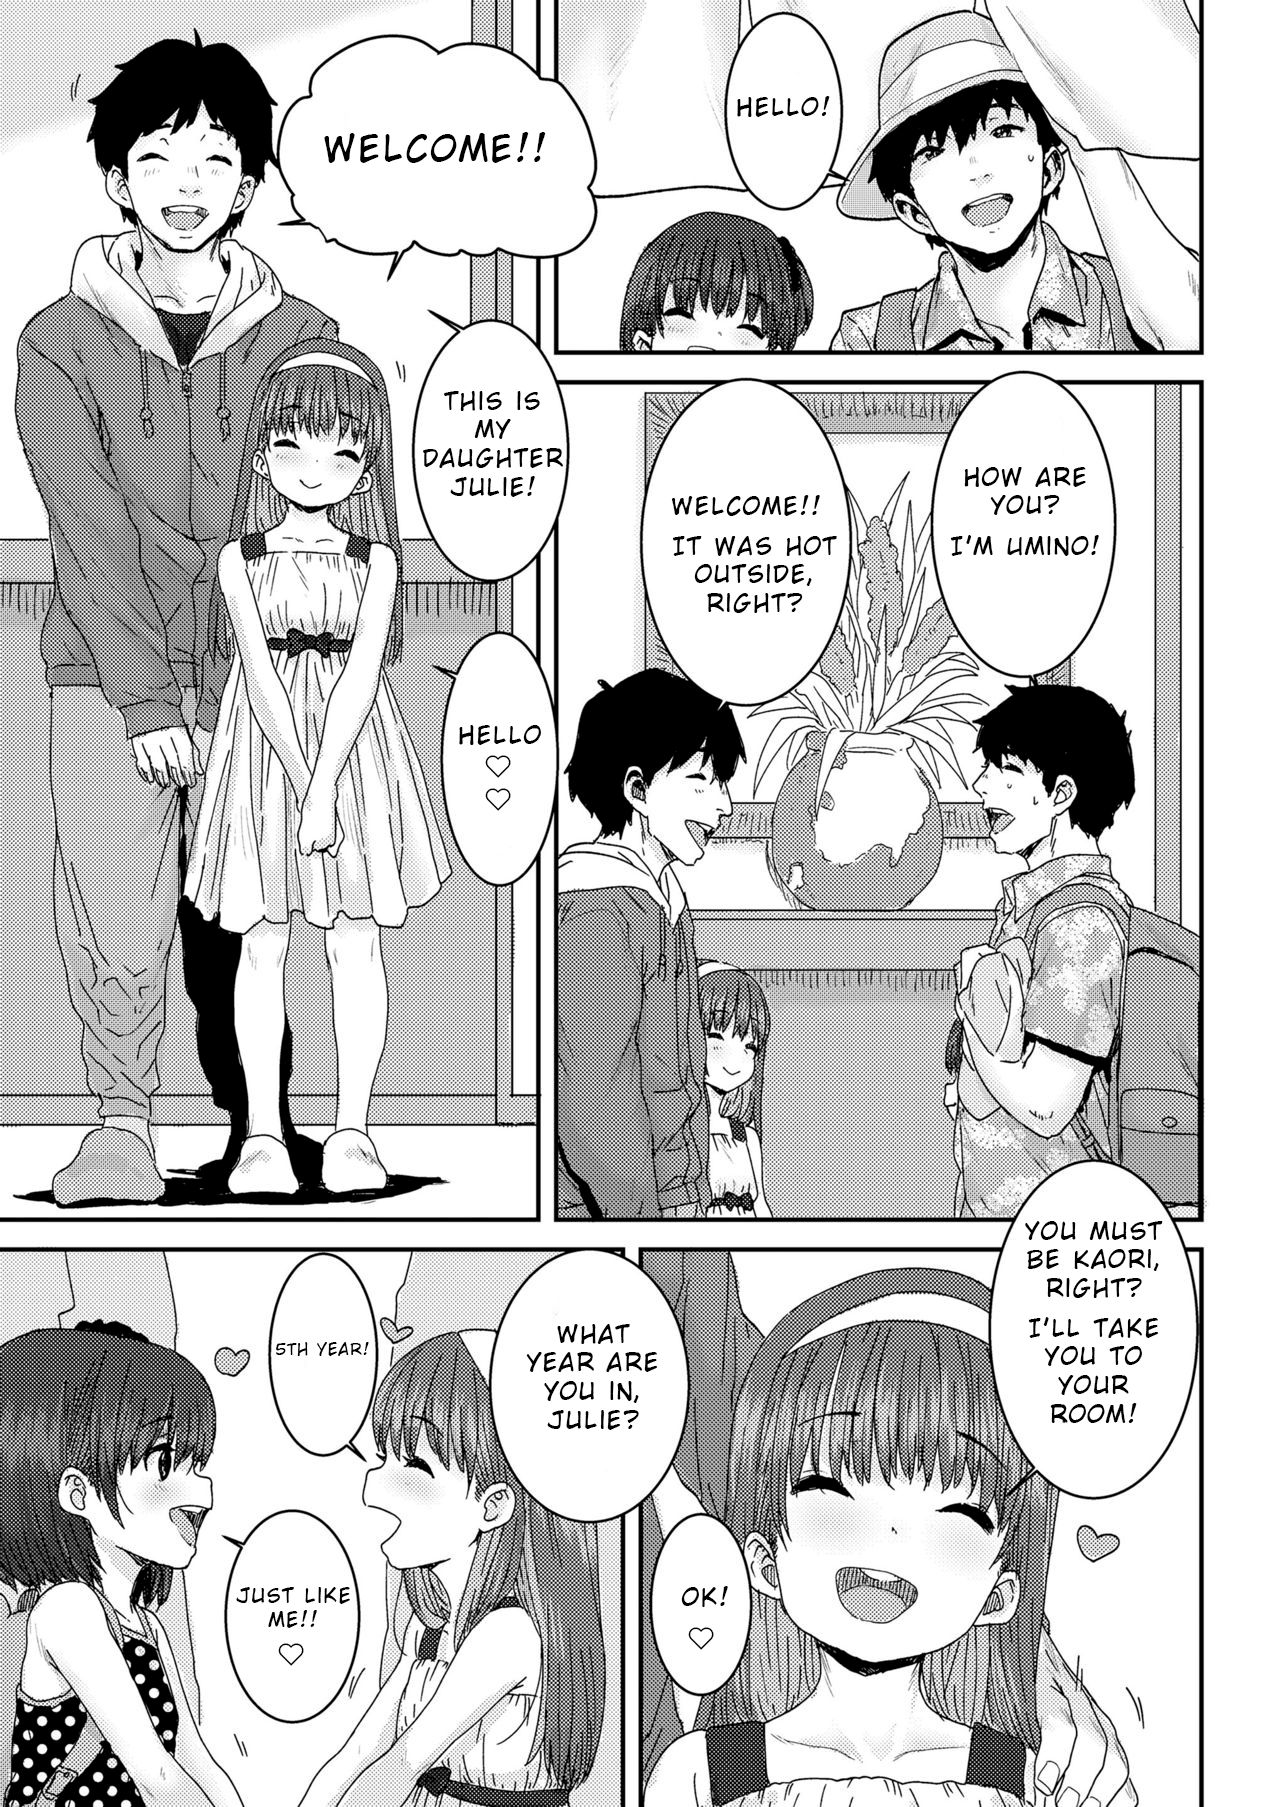 Oyako Swapping | Daddy Daughter Swapping - Page 3 - HentaiEra